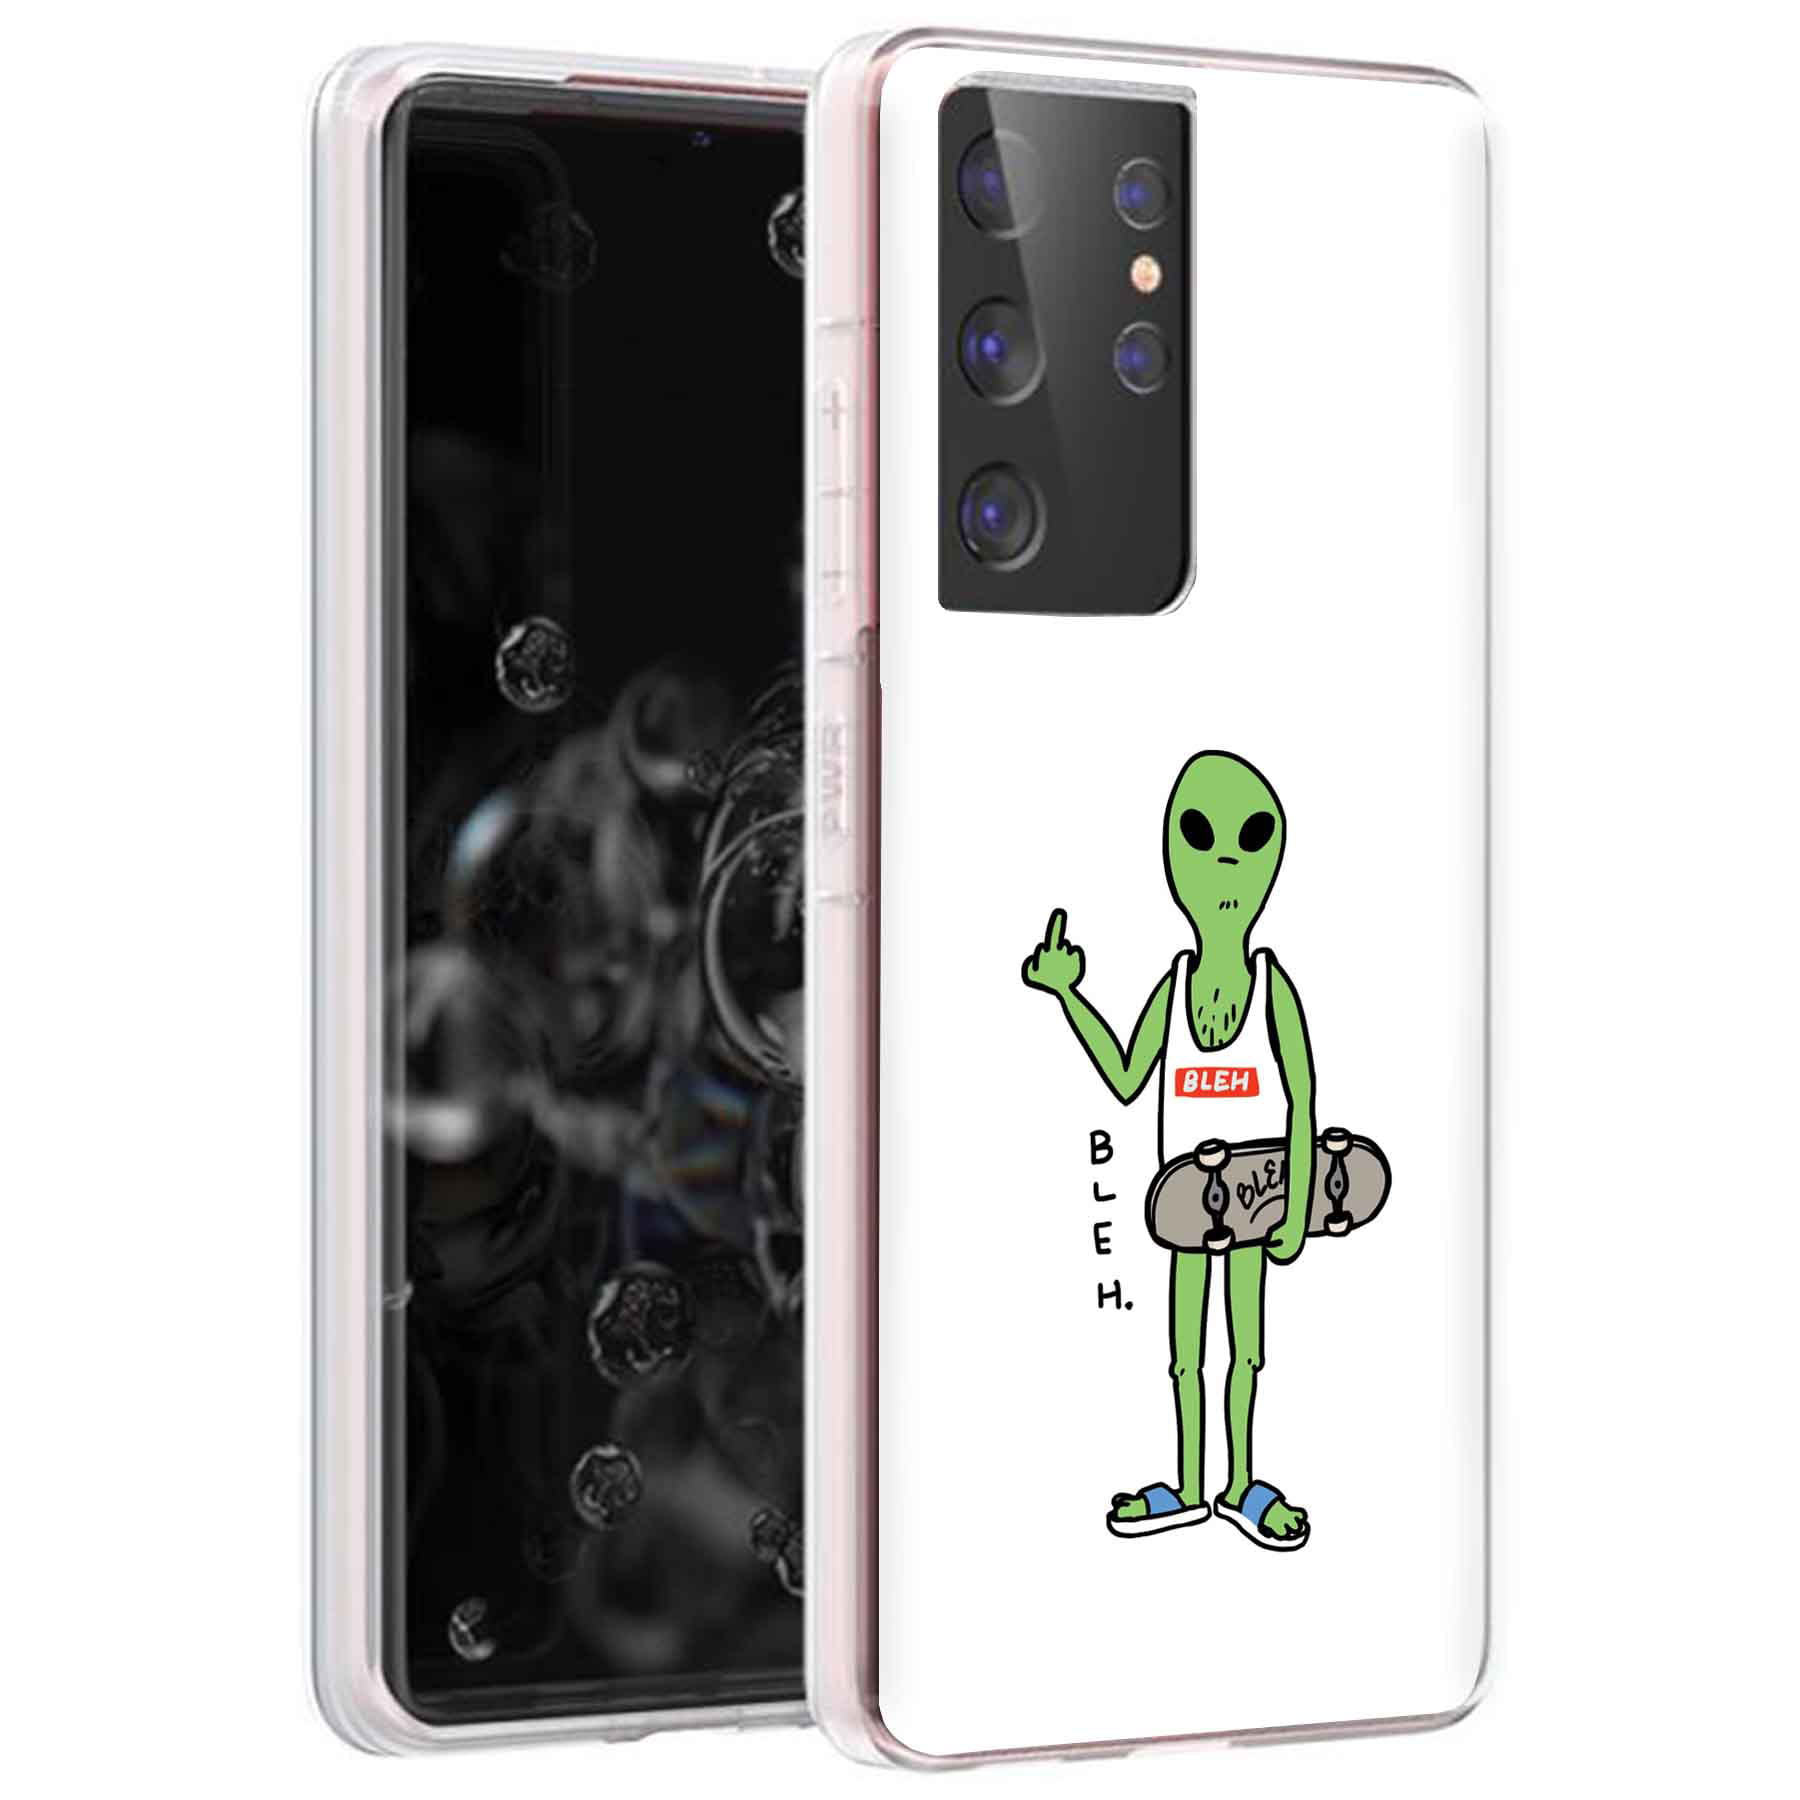 Not S21,S21 Ultra S30+, ,Fruit 5 Print,Light Weight,Flexible,Soft Touch,Anti-Scratch TPU Phone Case for Samsung Galaxy S21+ 5G